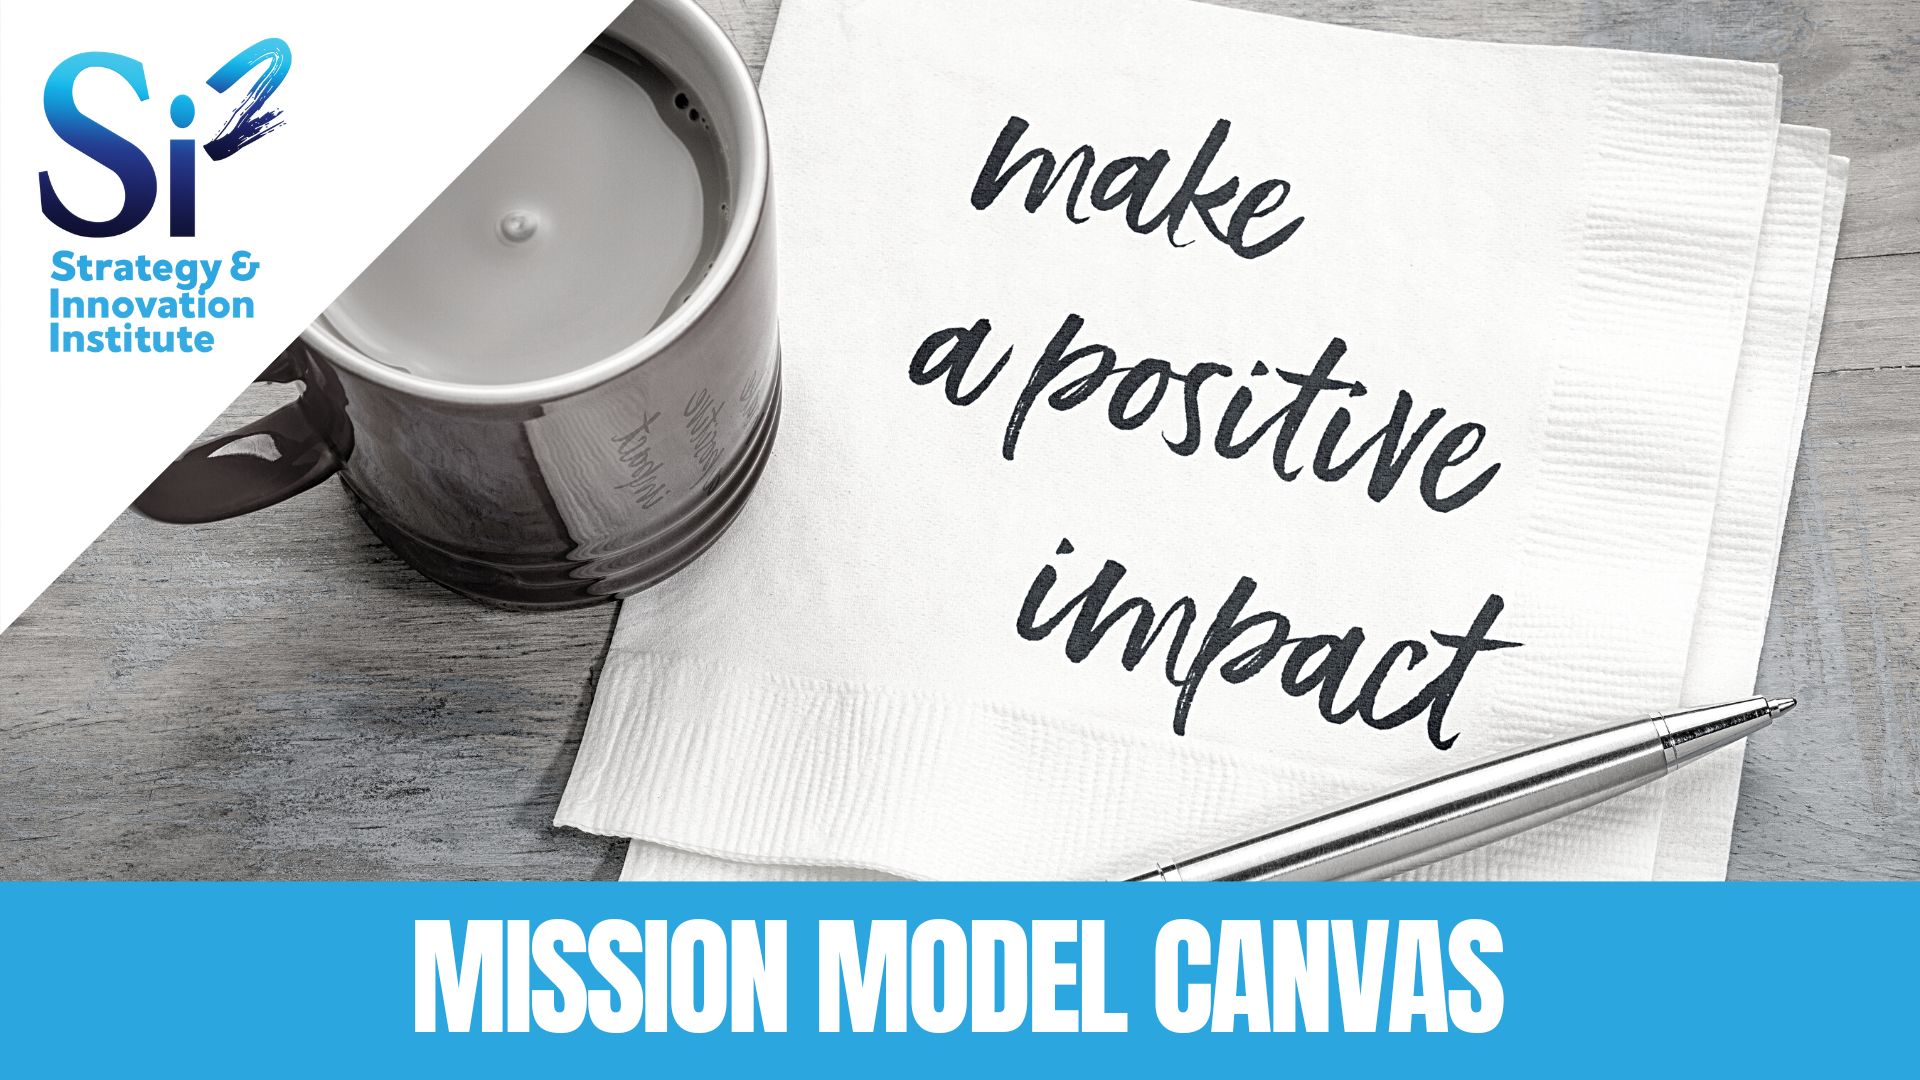 Social Impact & The Mission Model Canvas